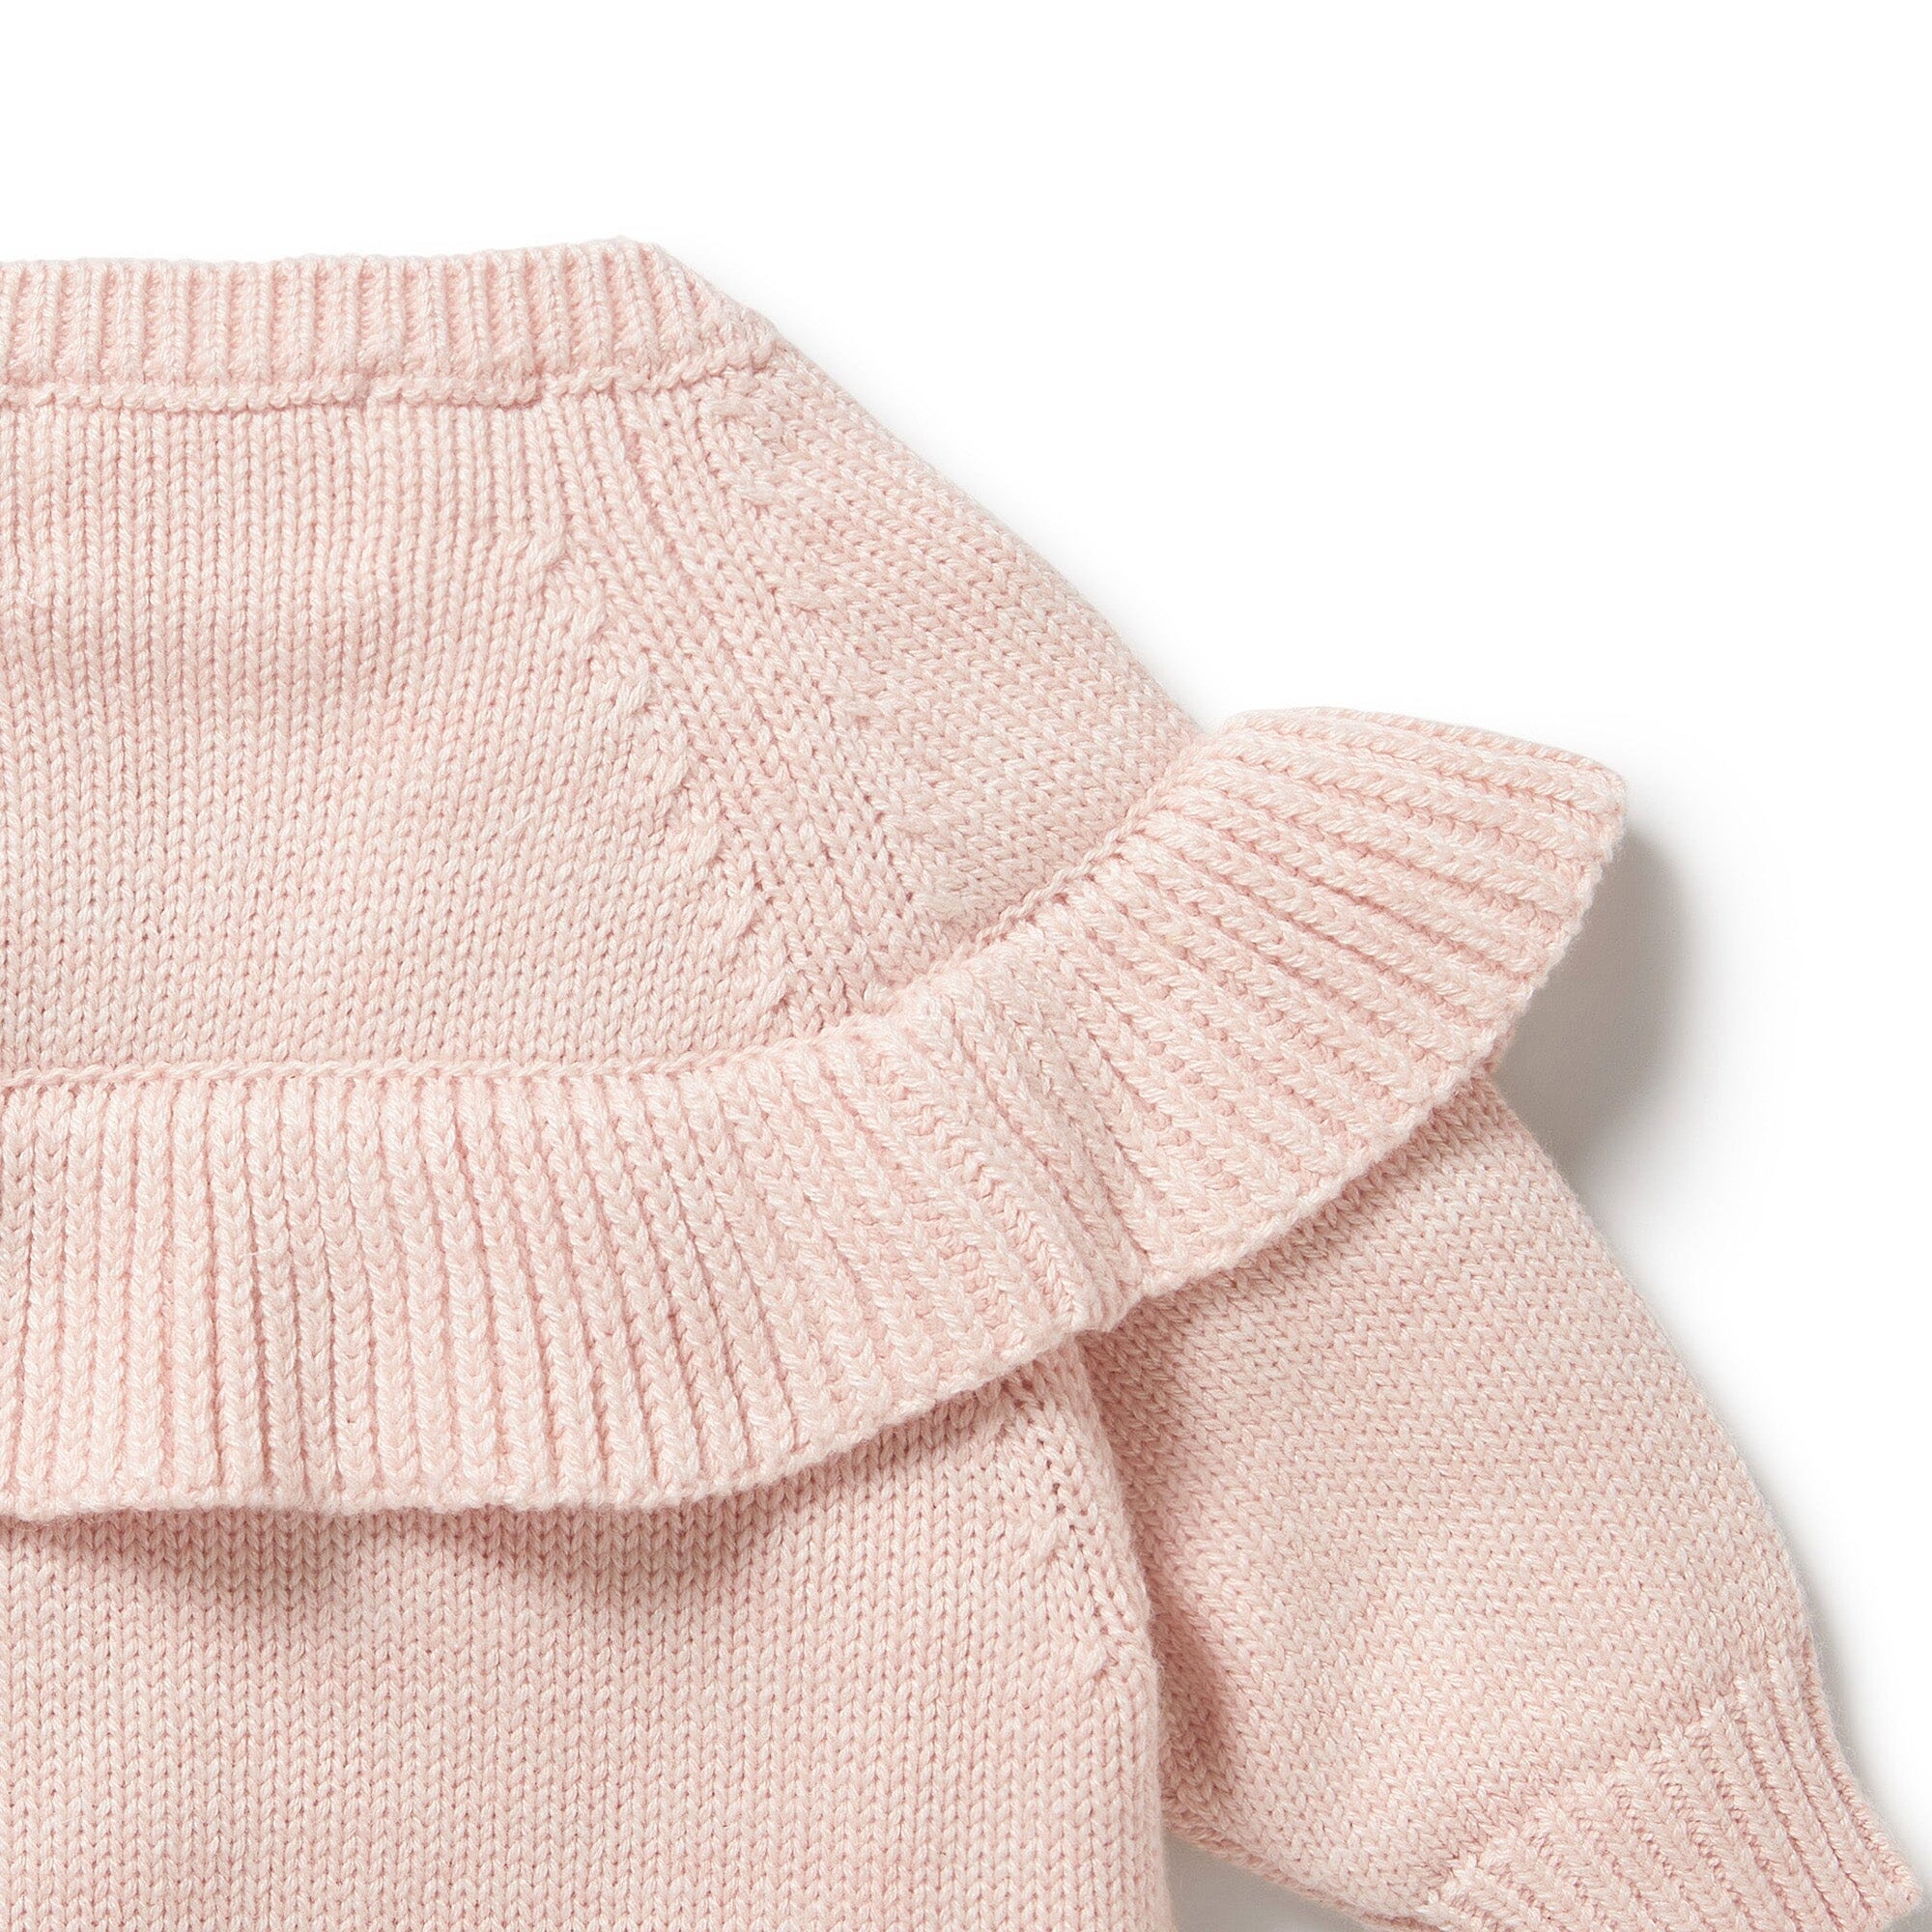 Wilson & Frenchy - Knitted Ruffle Jumper - Pink Baby Wilson & Frenchy